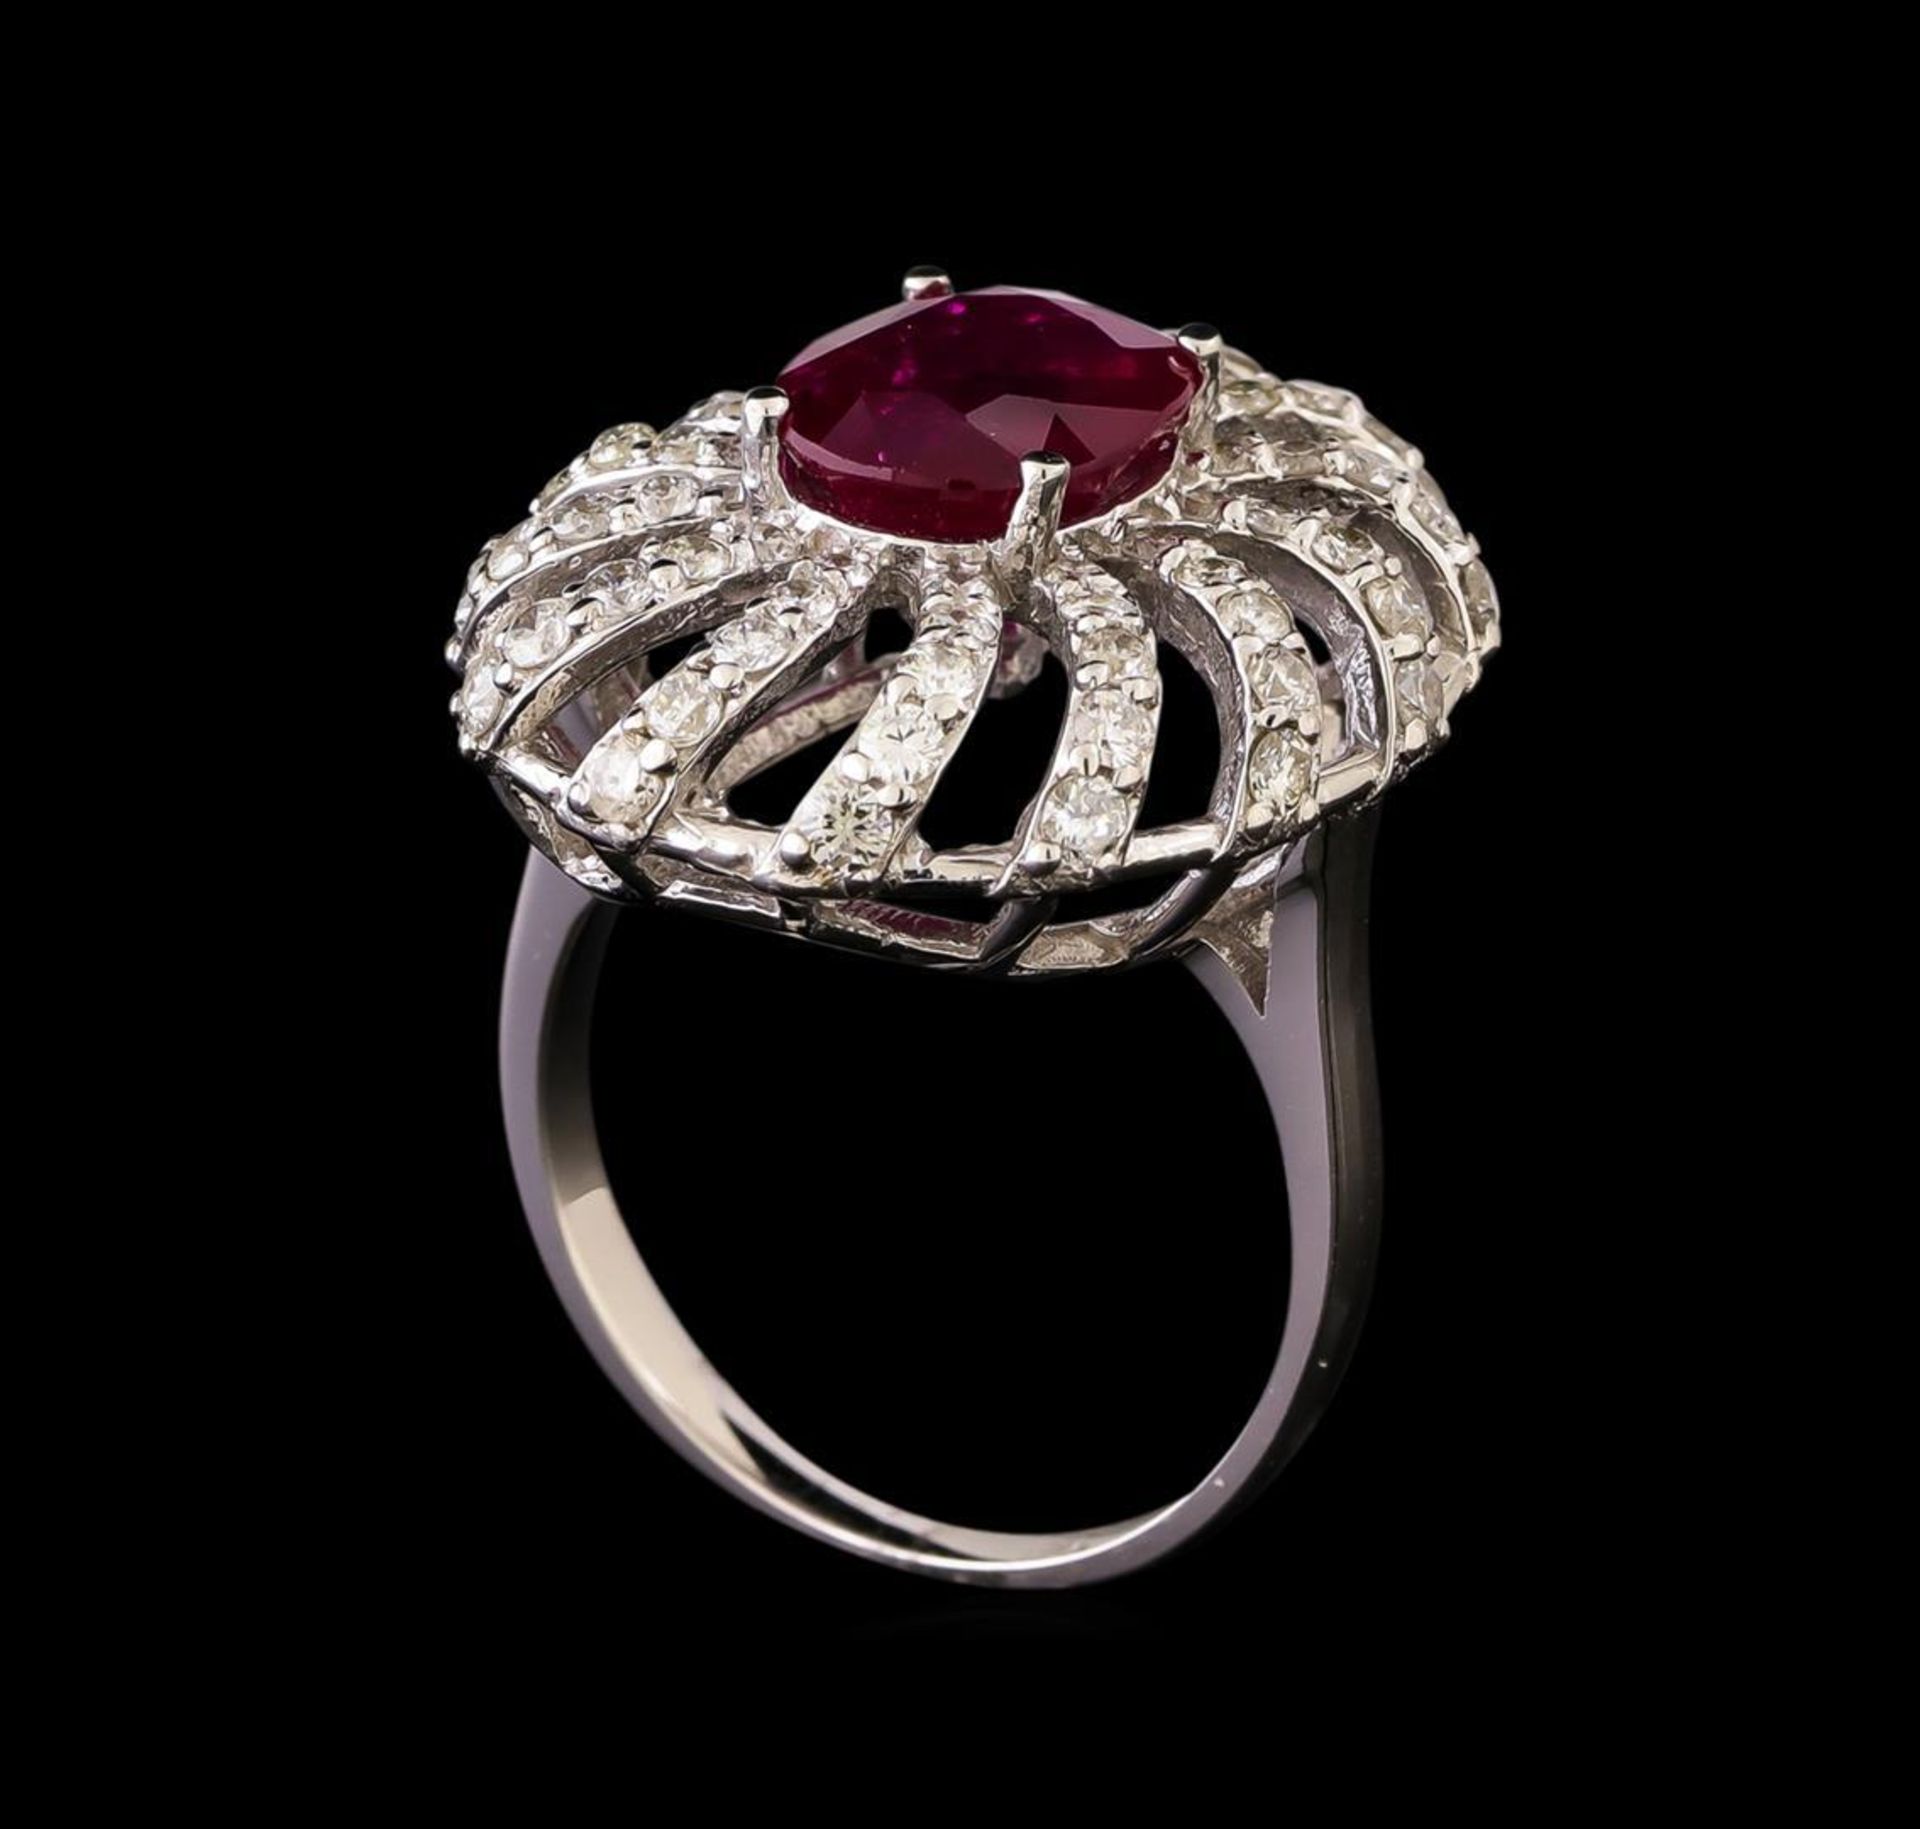 GIA Cert 2.99 ctw Ruby and Diamond Ring - 14KT White Gold - Image 4 of 7